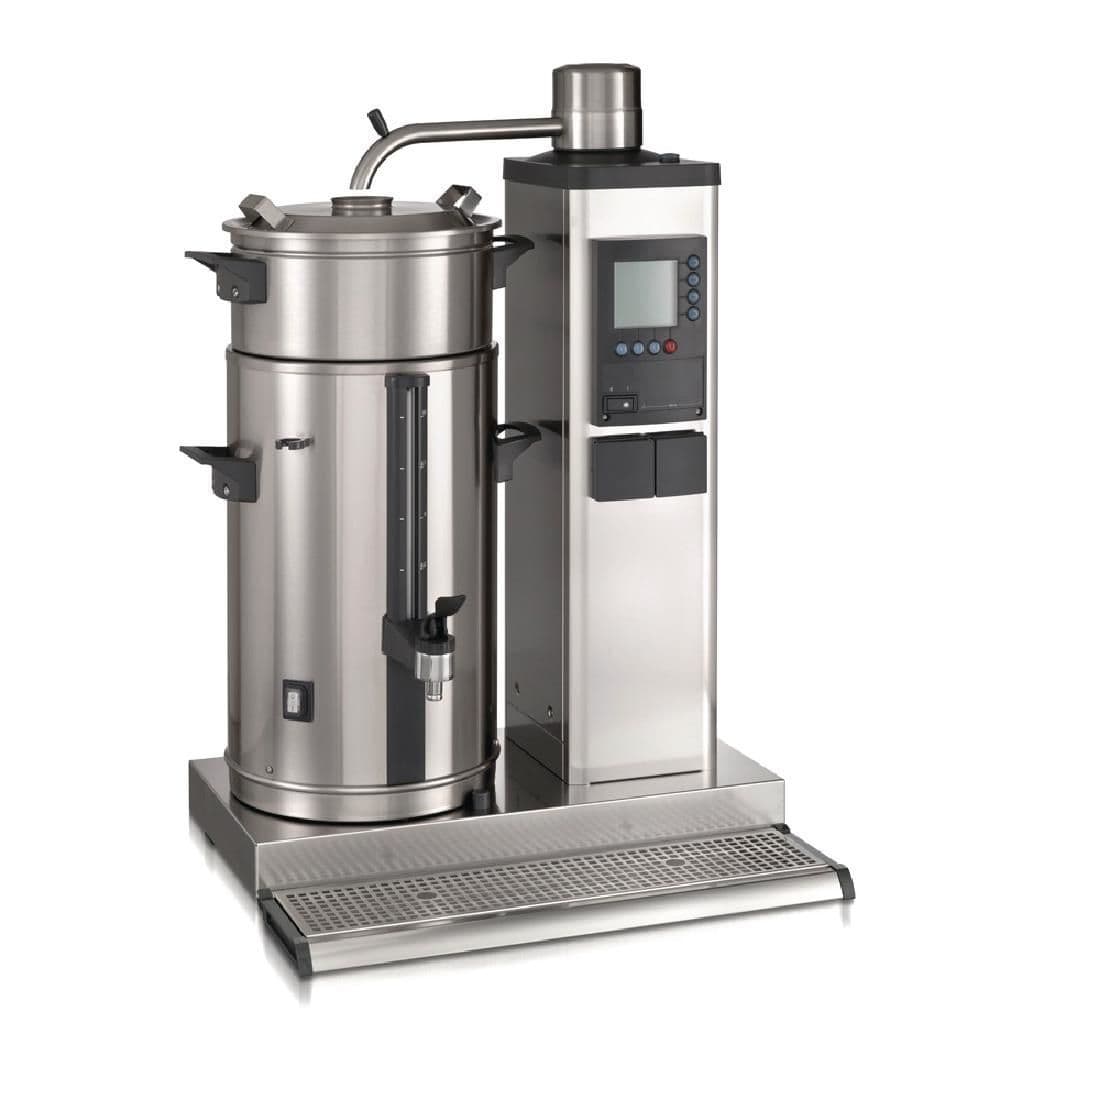 DC679 Bravilor B20 L Bulk Coffee Brewer with 20Ltr Coffee Urn 3 Phase JD Catering Equipment Solutions Ltd